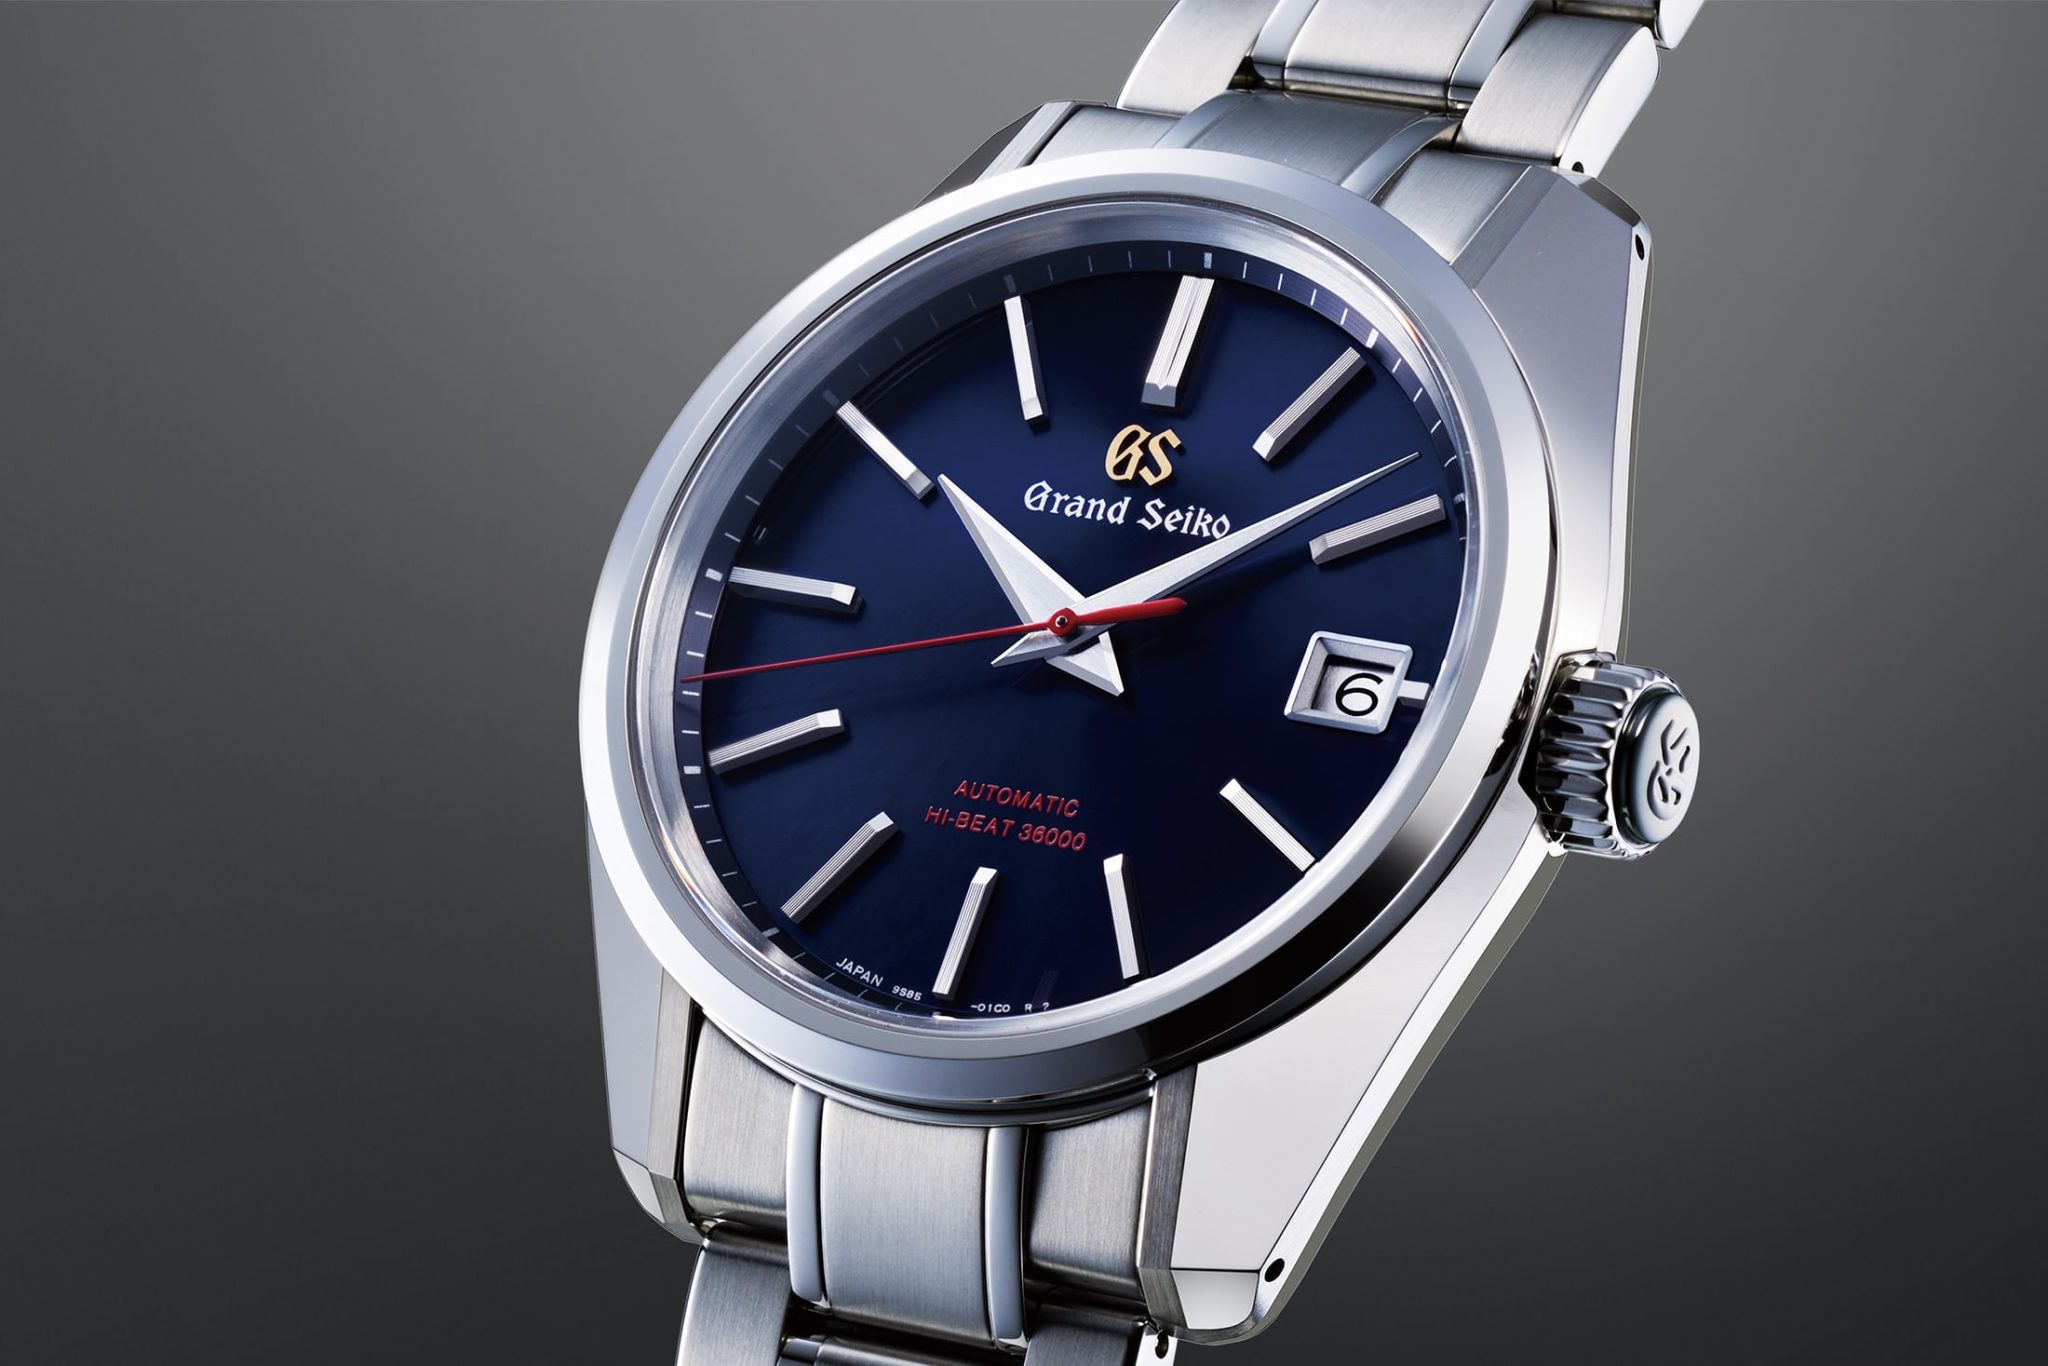 Grand Seiko Announces Four New Limited Edition Watches For The Brand's